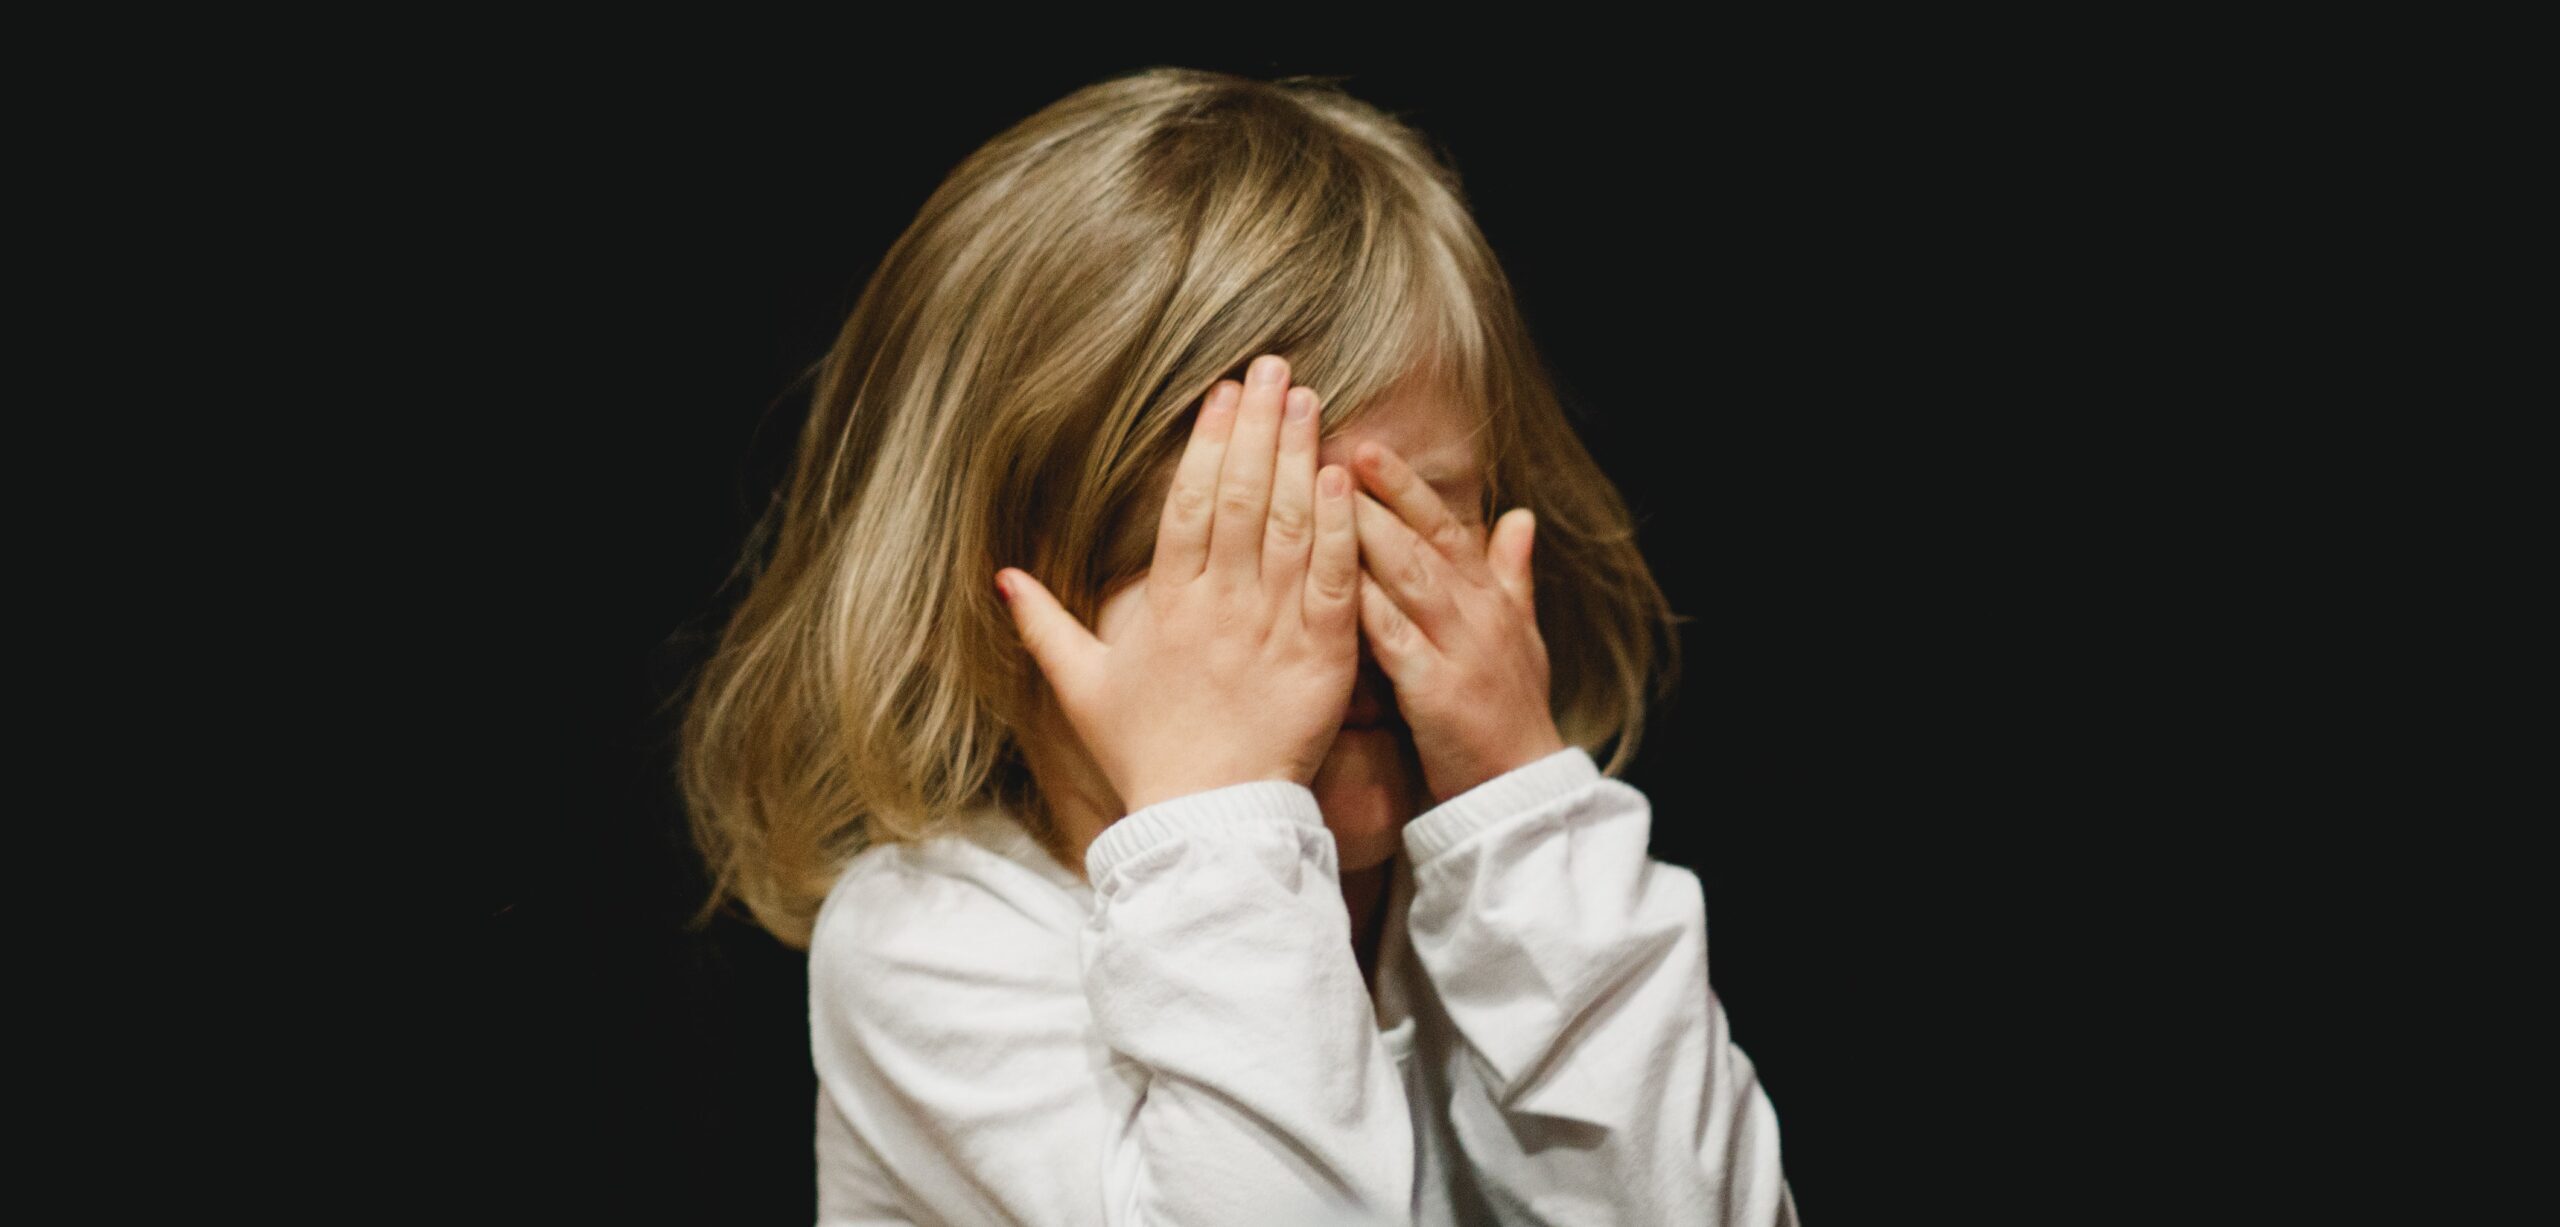 Little girl covering face with hands